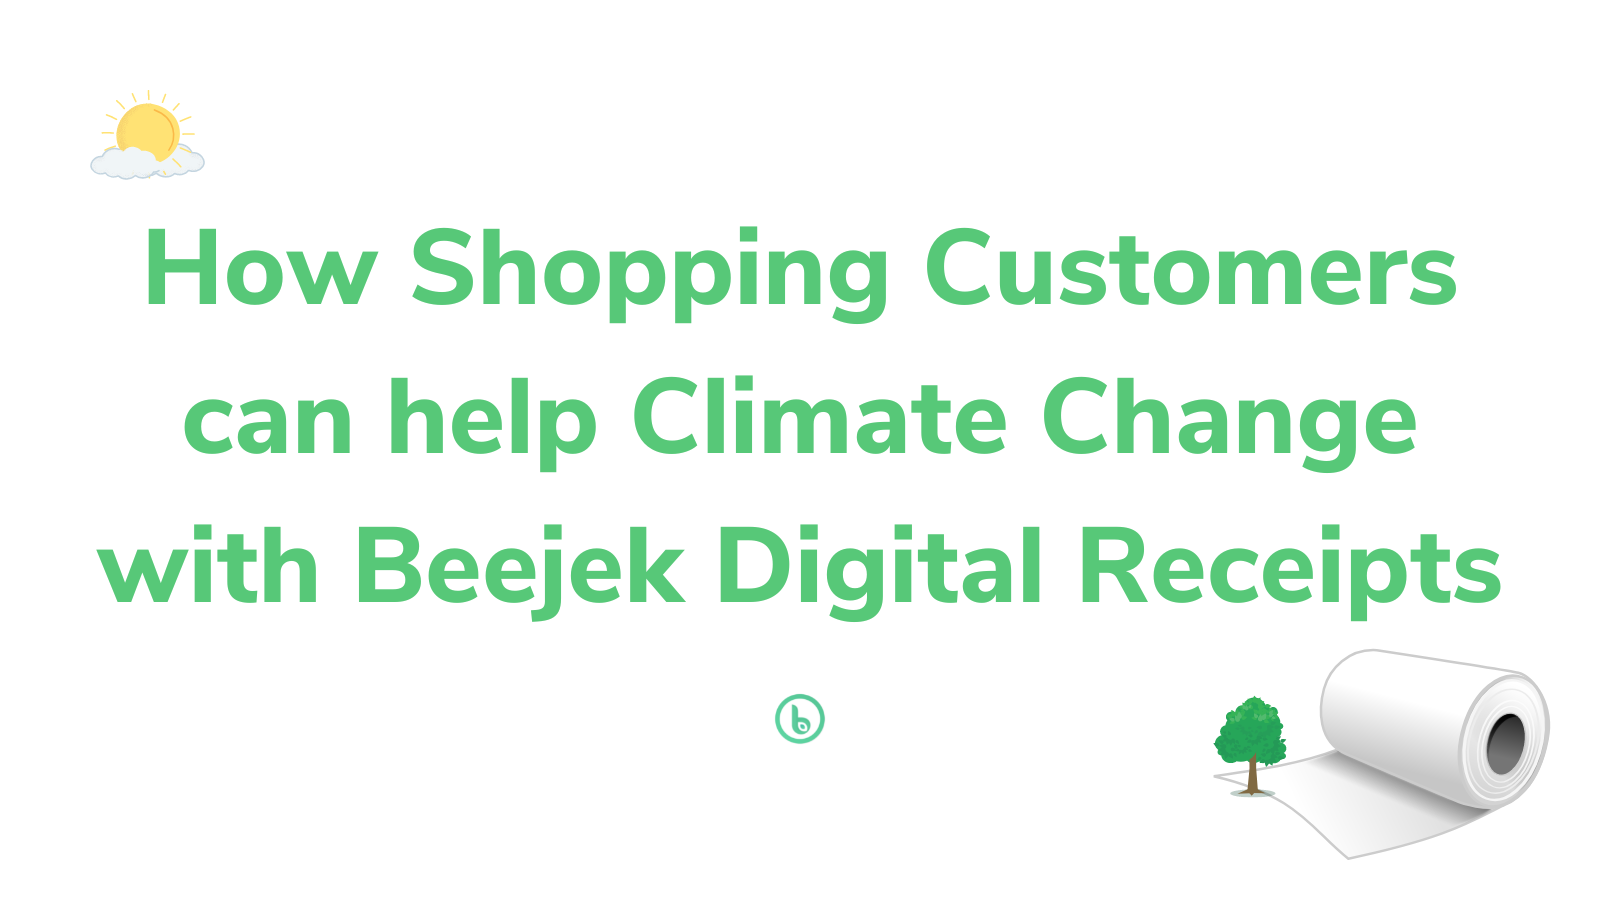 How shopping customers can help climate change with Beejek Digital Receipts